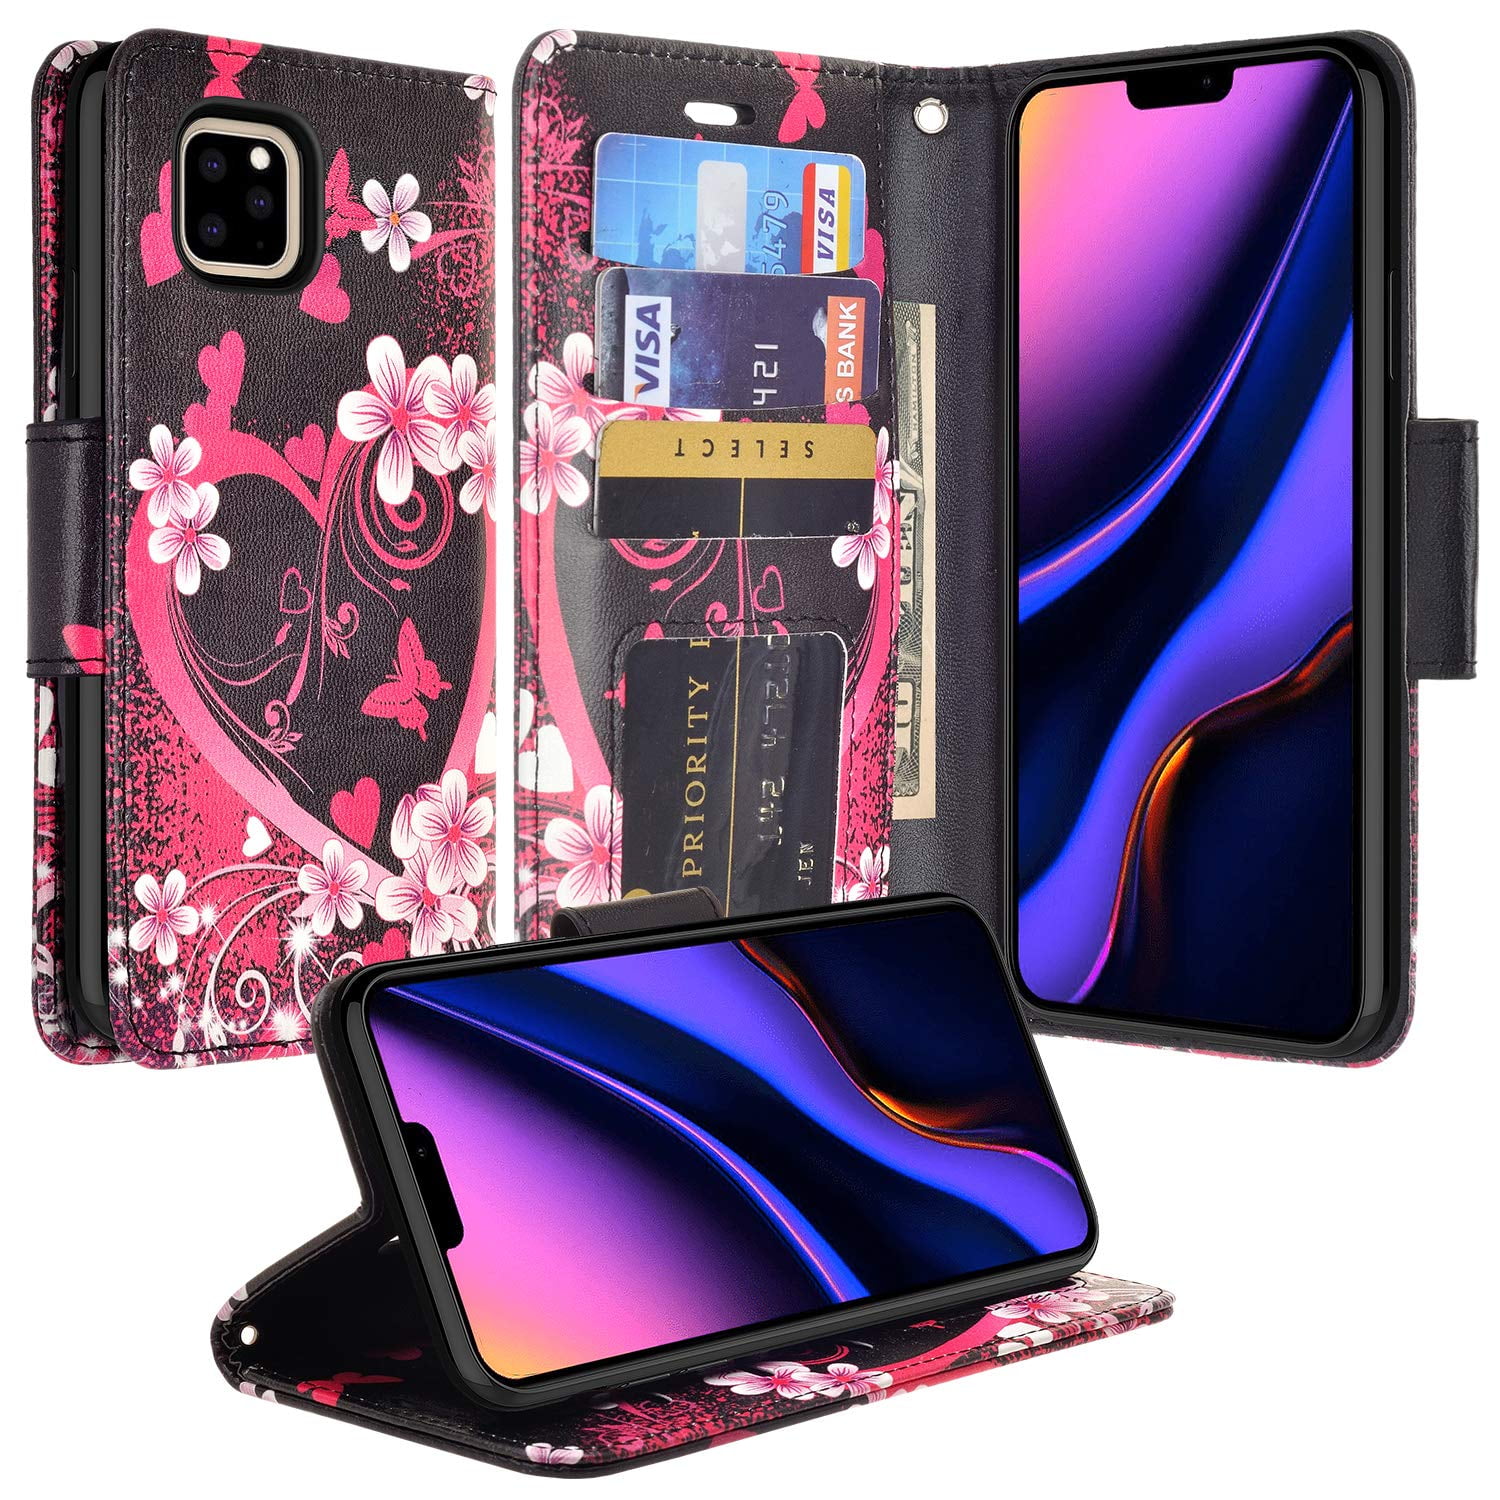 iPhone 11 Pro Max Case Wallet Leather Flip Pouch Cover Folio [Kickstand] Cute Girls Women Phone ...